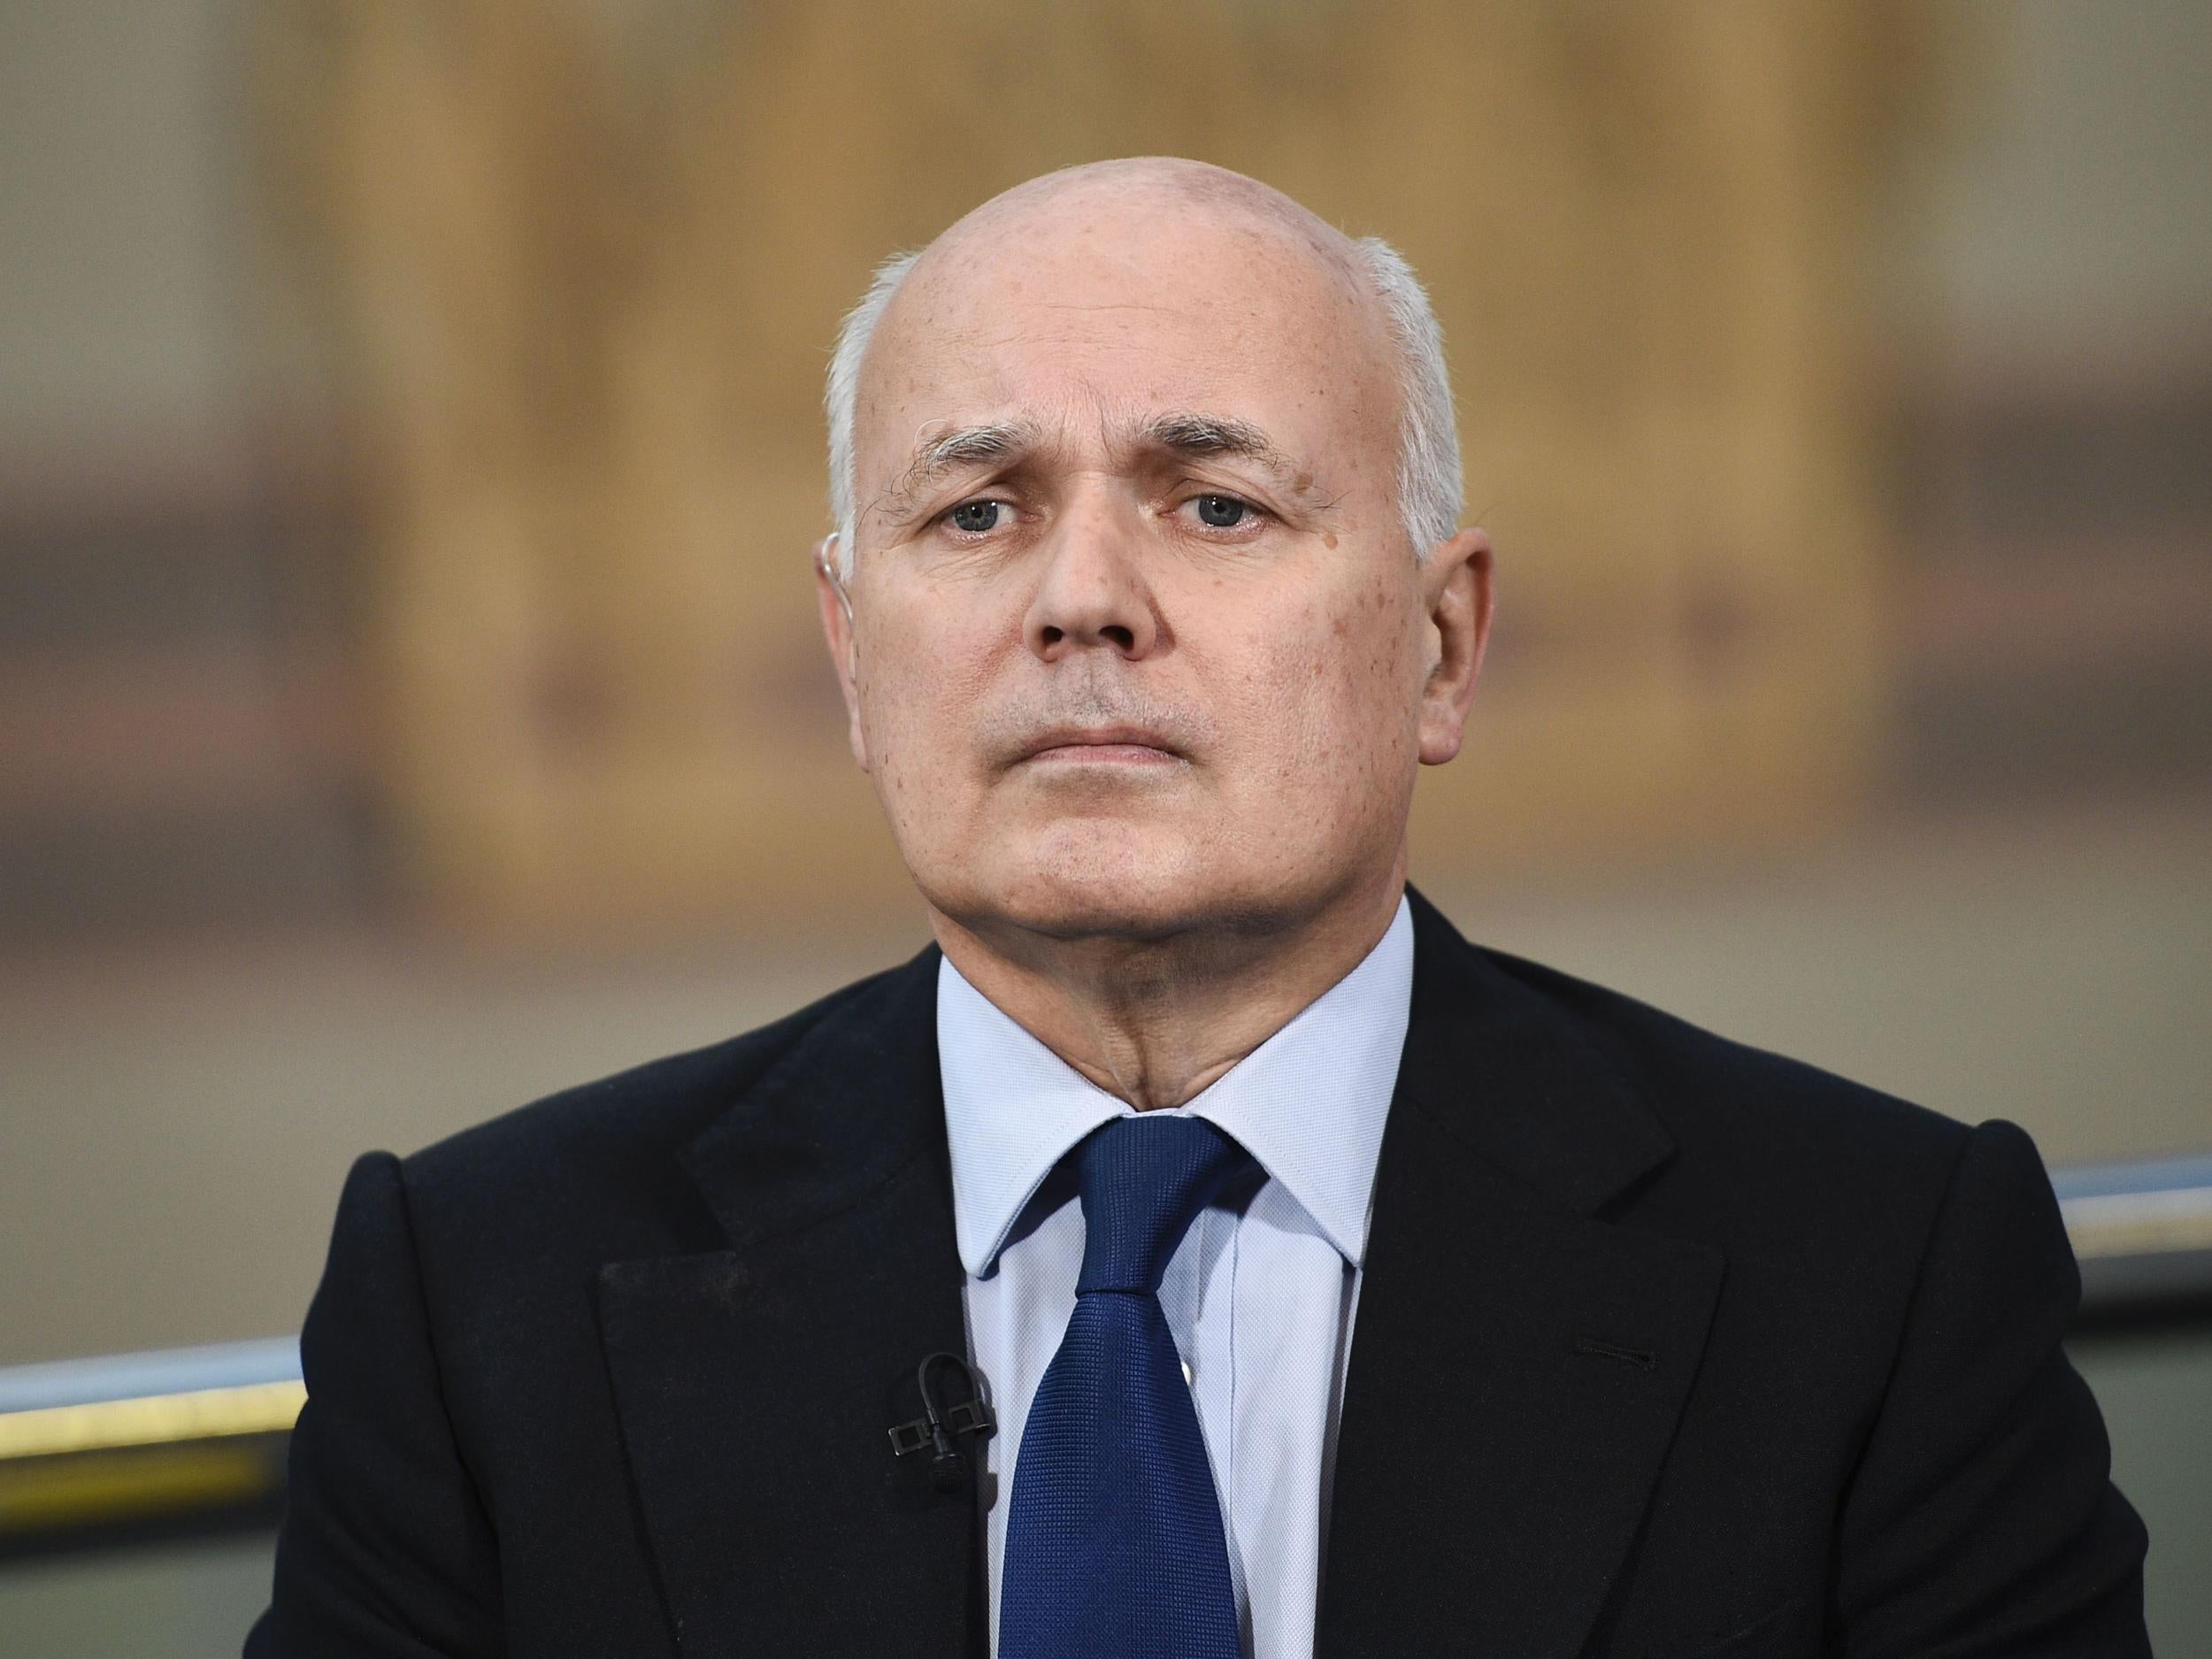 Too many businesses are failing to invest in upskilling their workforce and adopting new technology, according to Iain Duncan Smith’s Centre for Social Justice